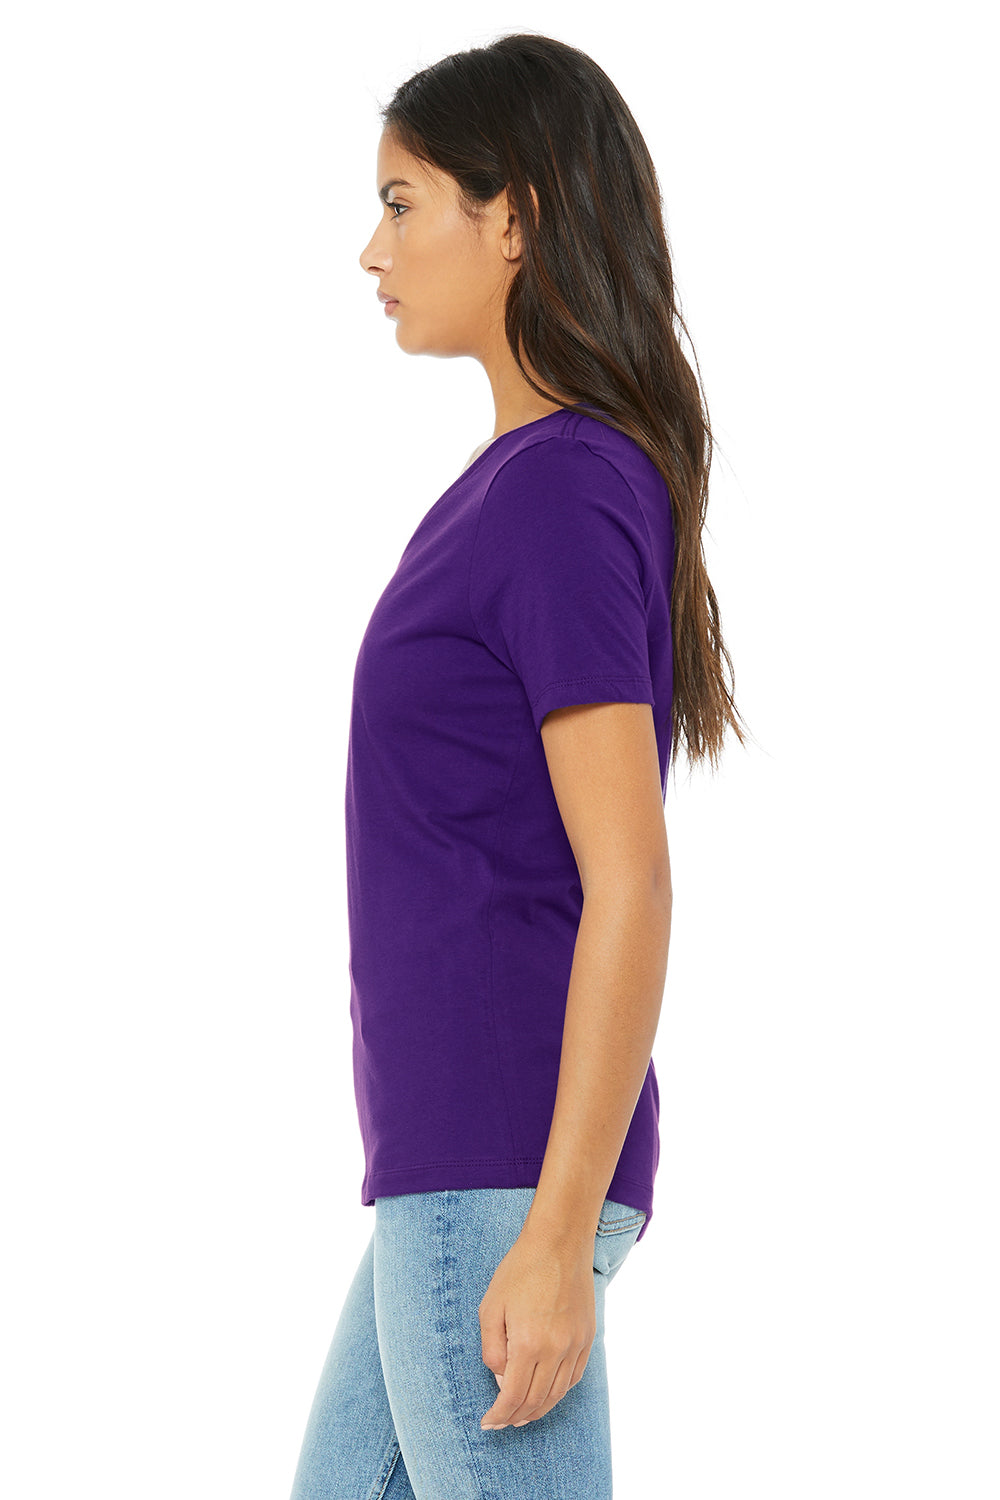 Bella + Canvas BC6405/6405 Womens Relaxed Jersey Short Sleeve V-Neck T-Shirt Team Purple Model Side